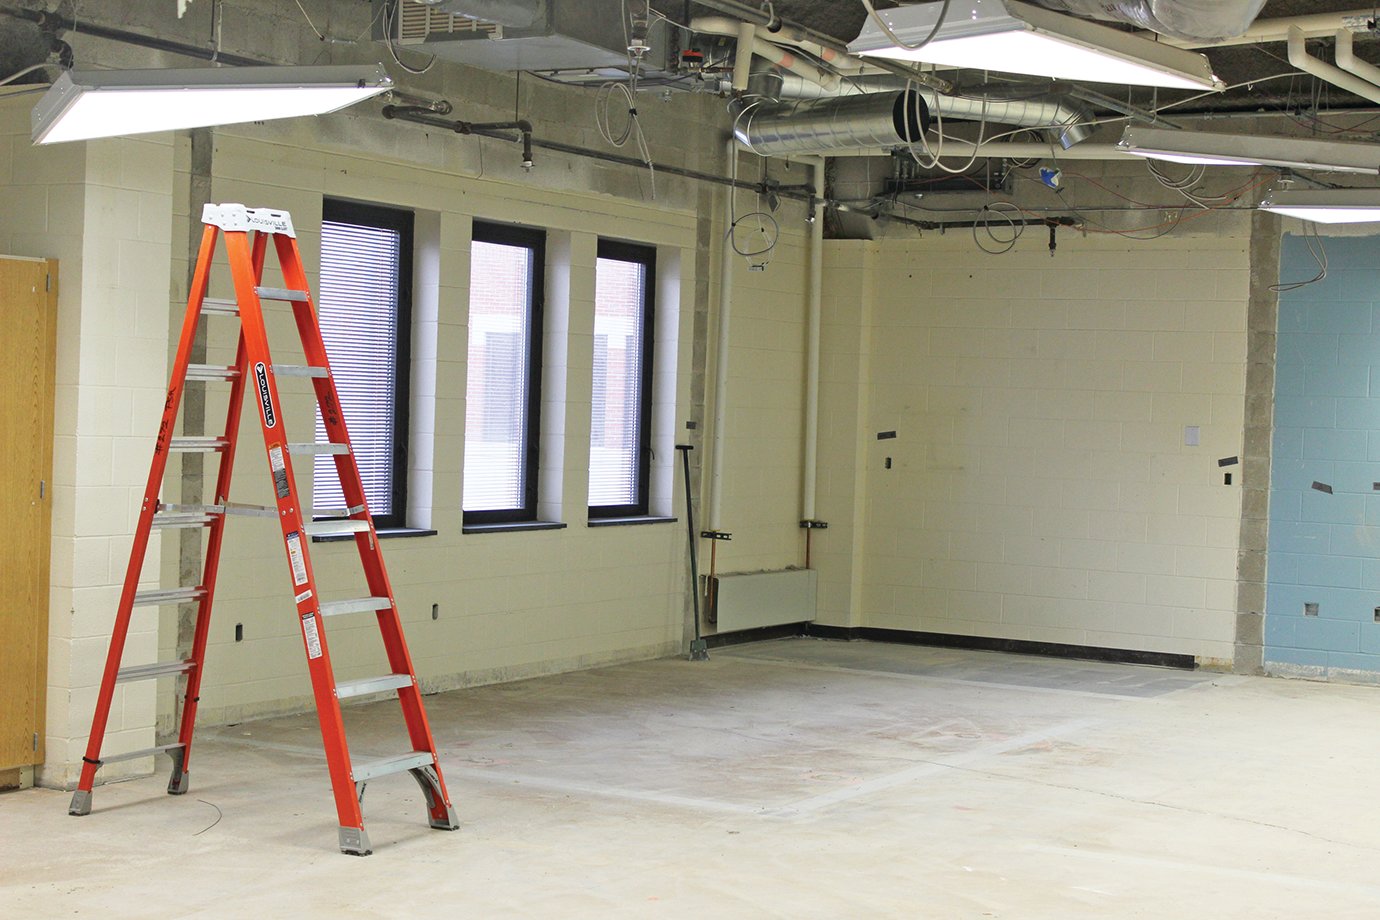 The drama room at Crawfordsville High School, in the northwest wing, awaits further renovation for its former vocal booths.